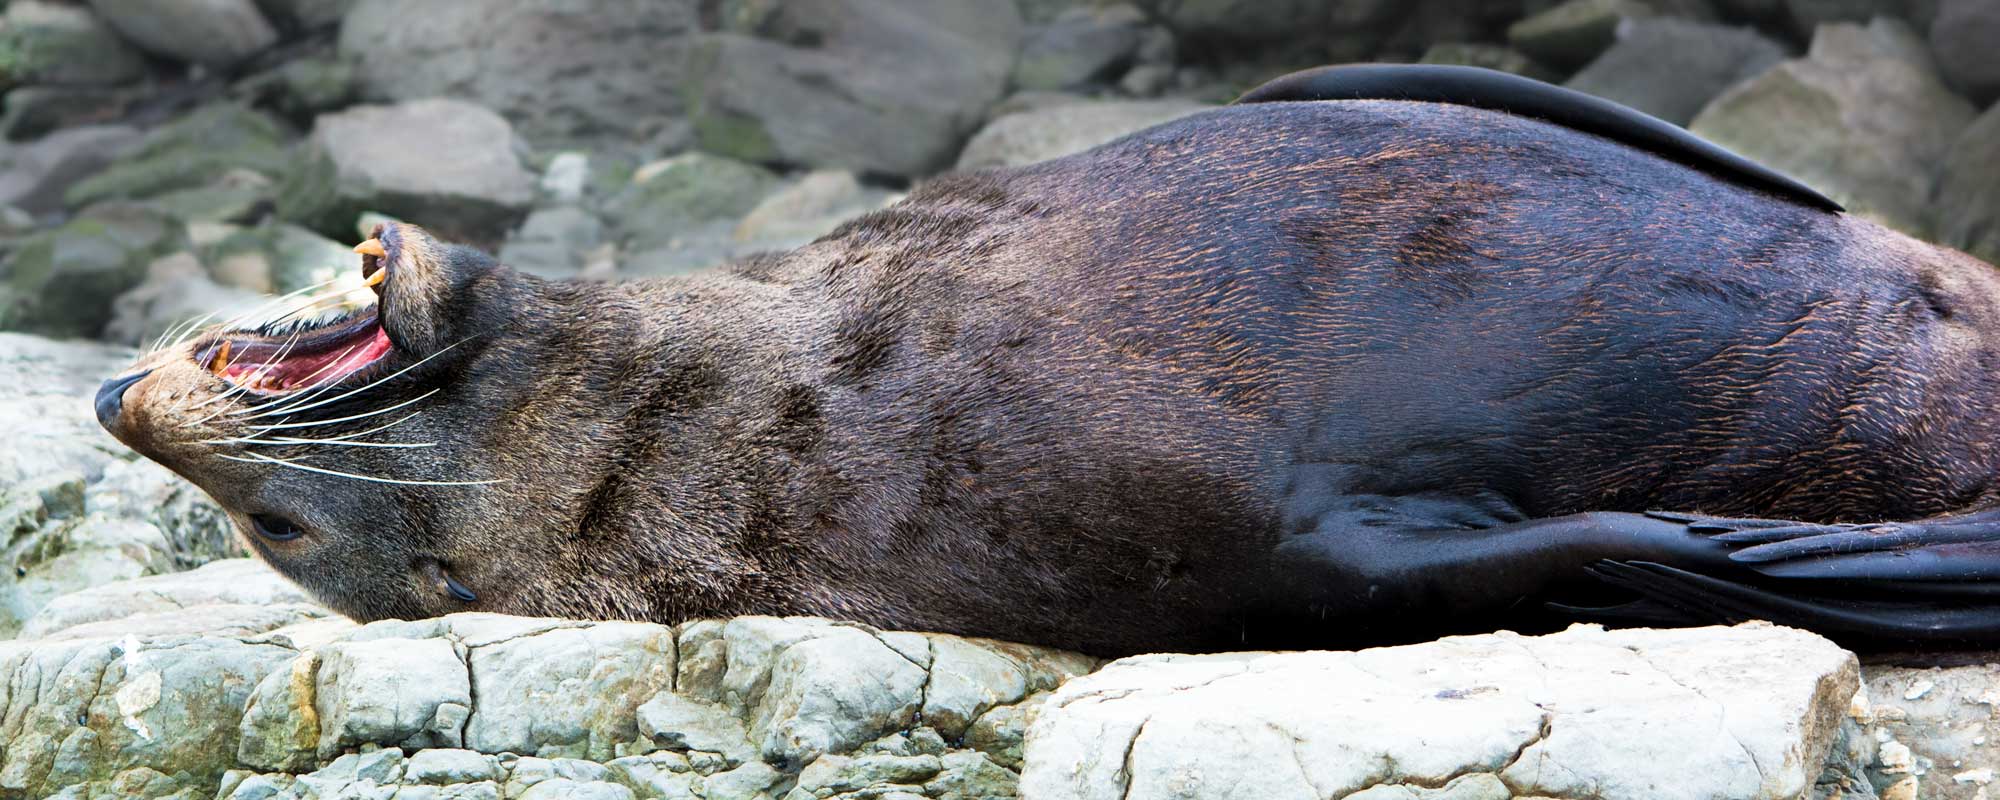 Conservation Photography: A tired and relaxed Sea Lion in natural habitat. Protect our environment!